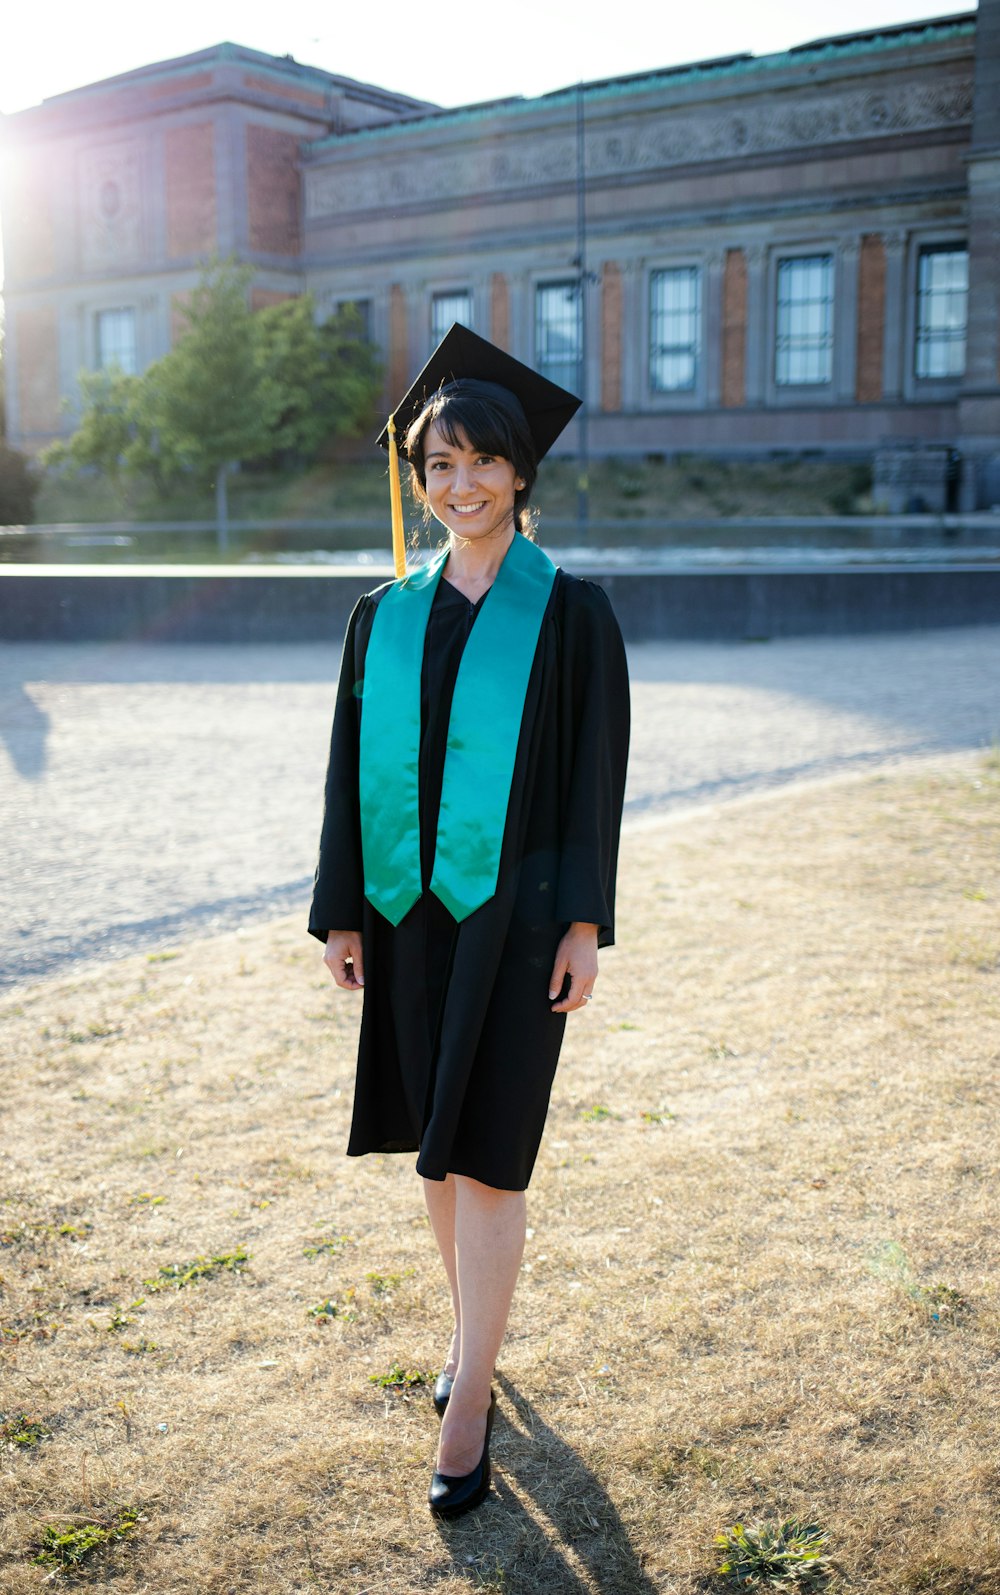 a woman in a graduation gown standing in a field